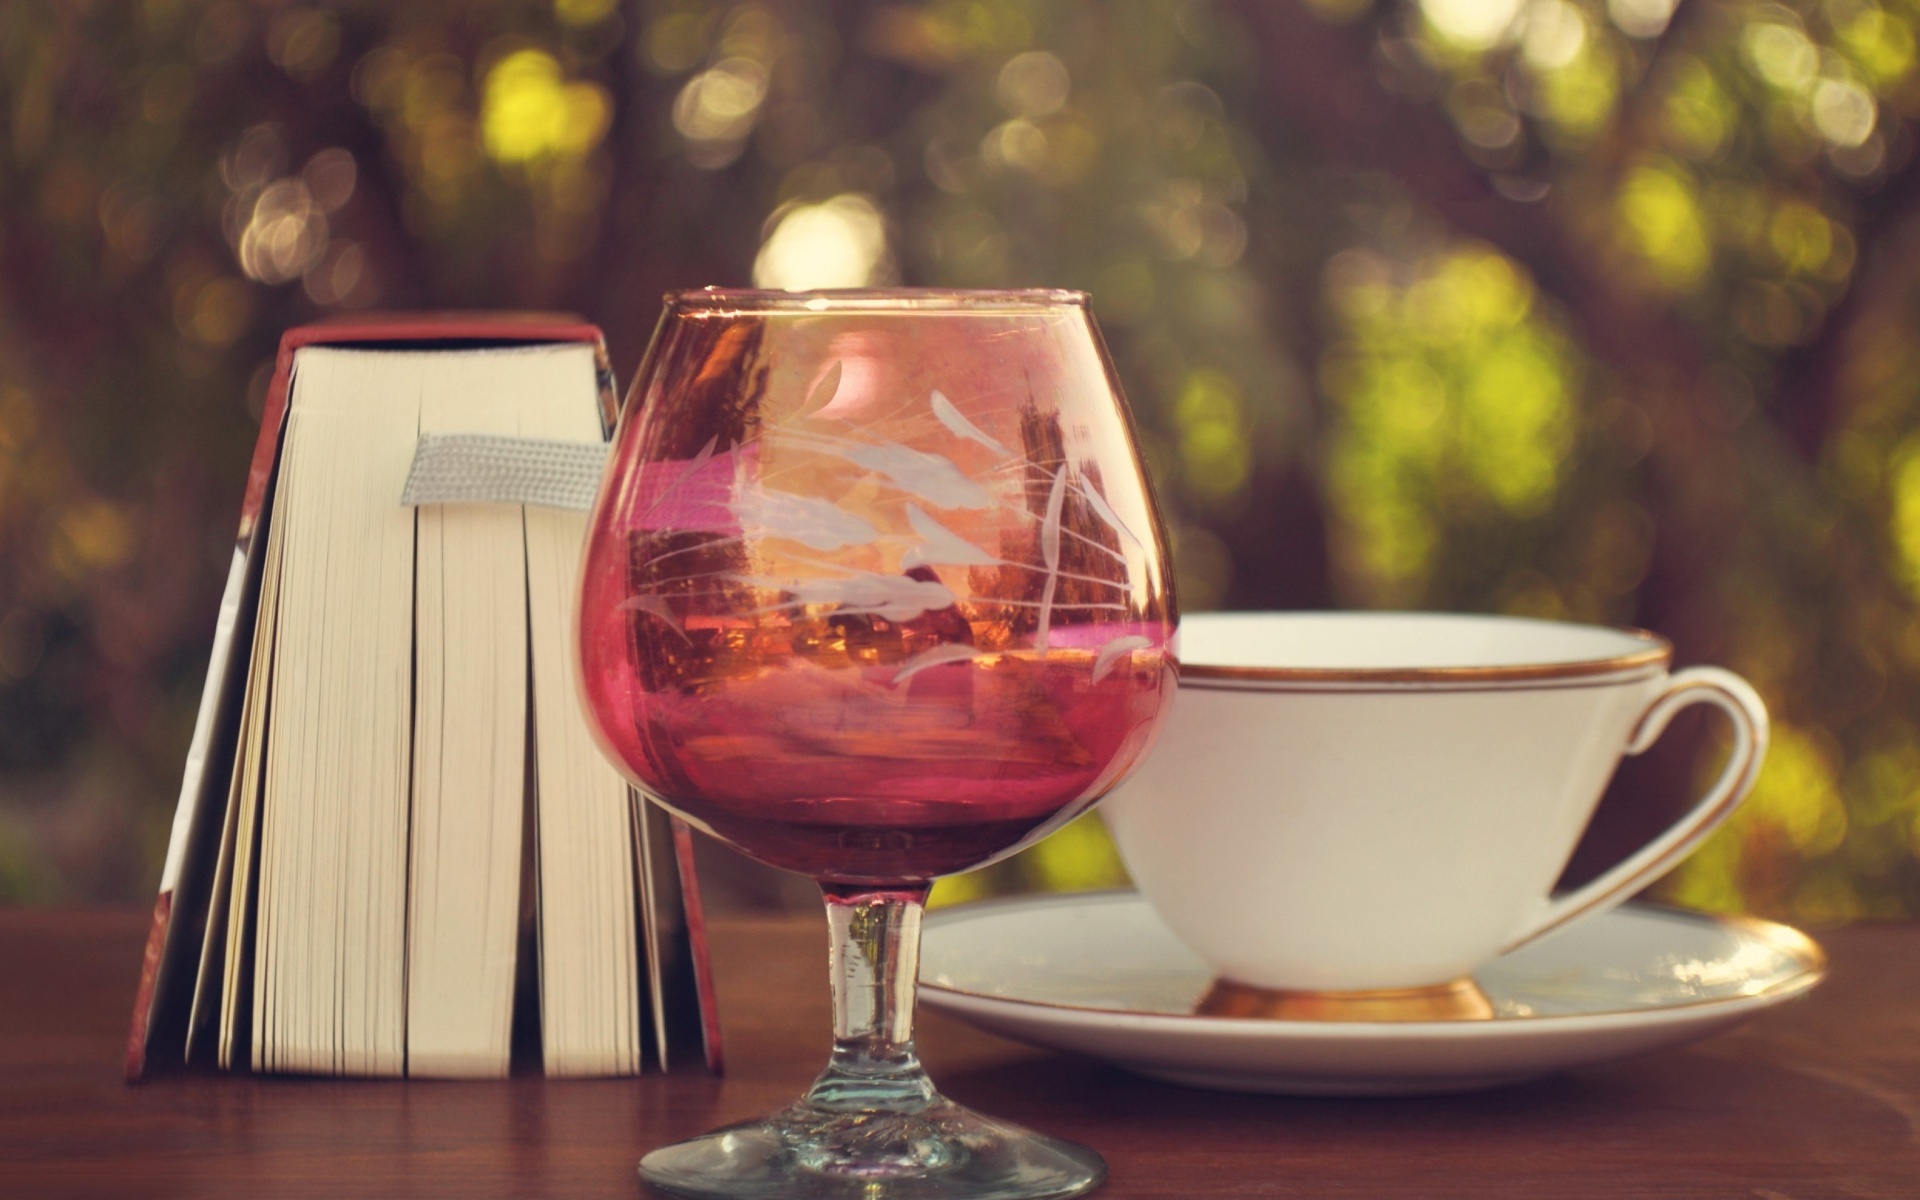 Perfect day with wine and book screenshot #1 1920x1200